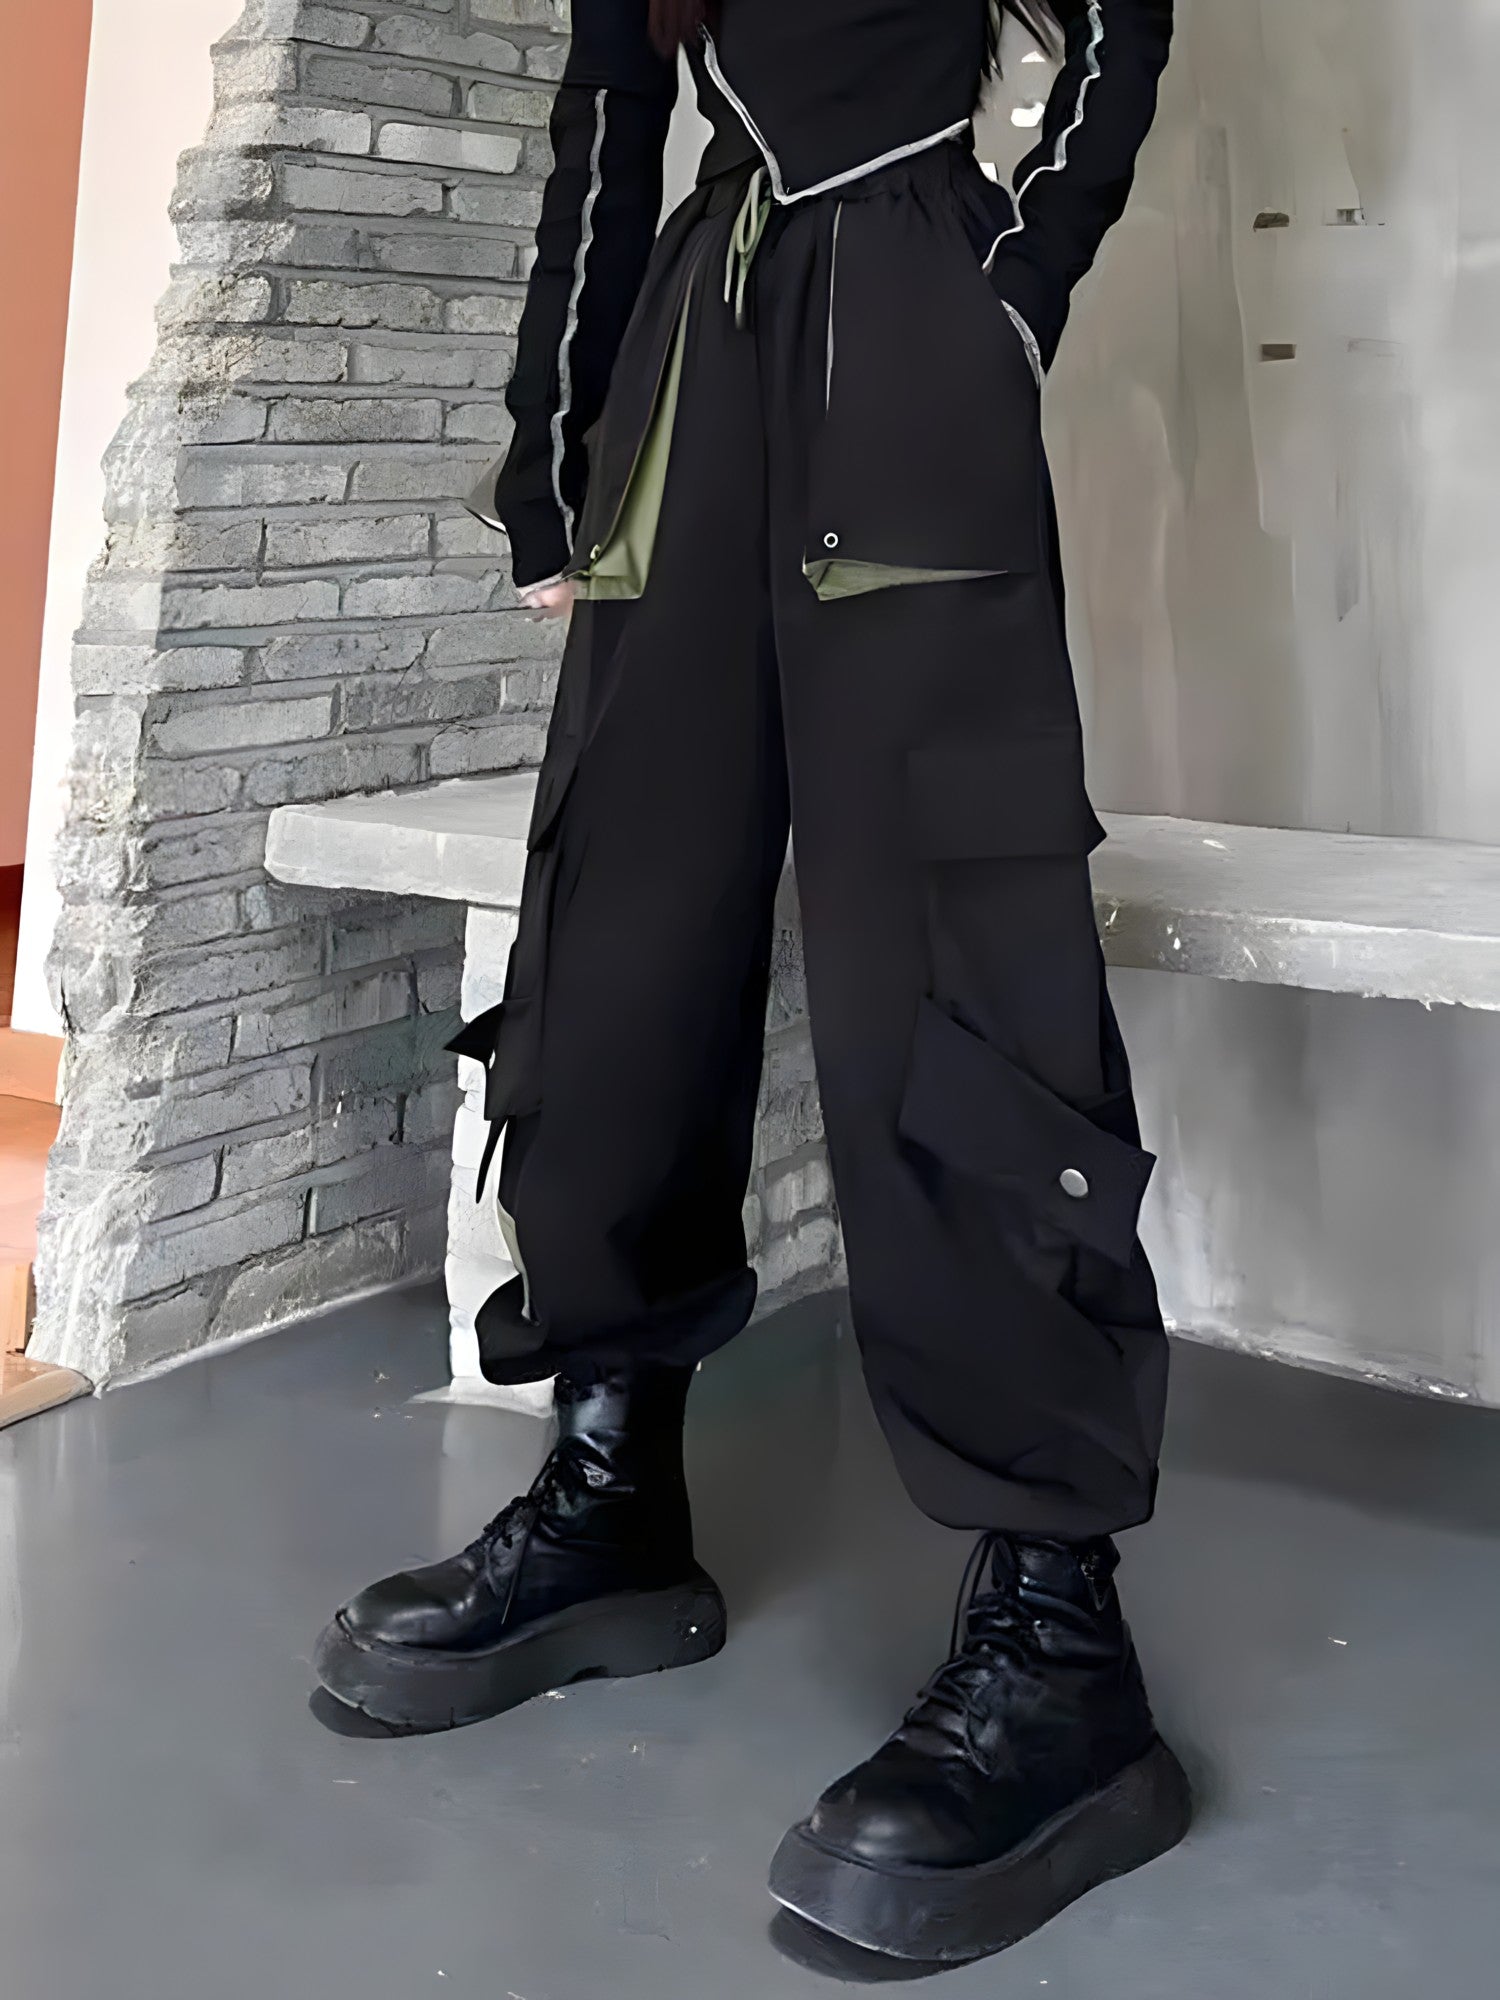 Black Cargo Pants for Women and Girls